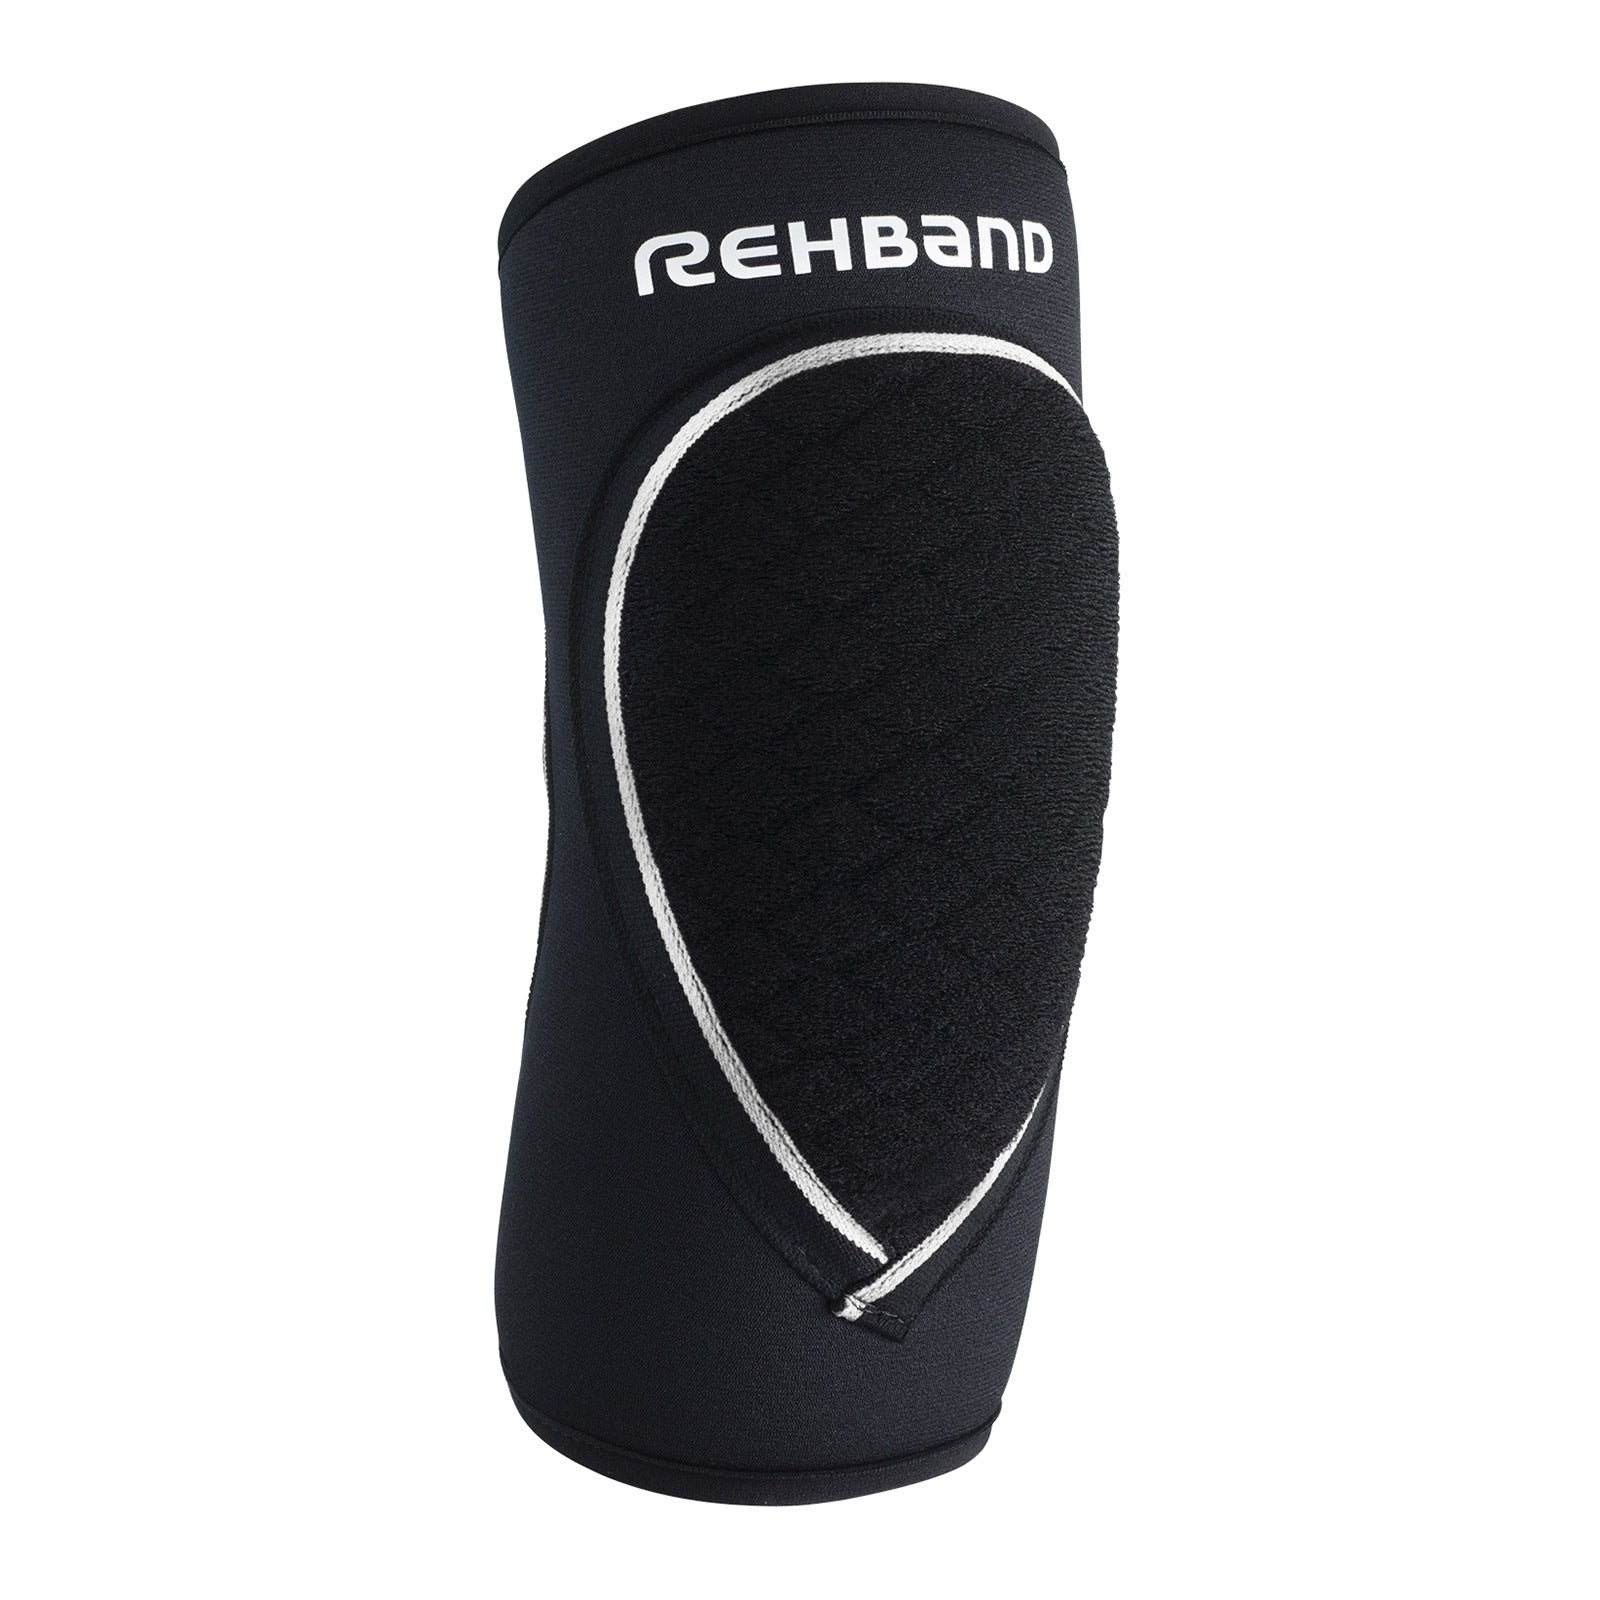 A black padded elbow sleeve with a white Rehband  lettering on the top